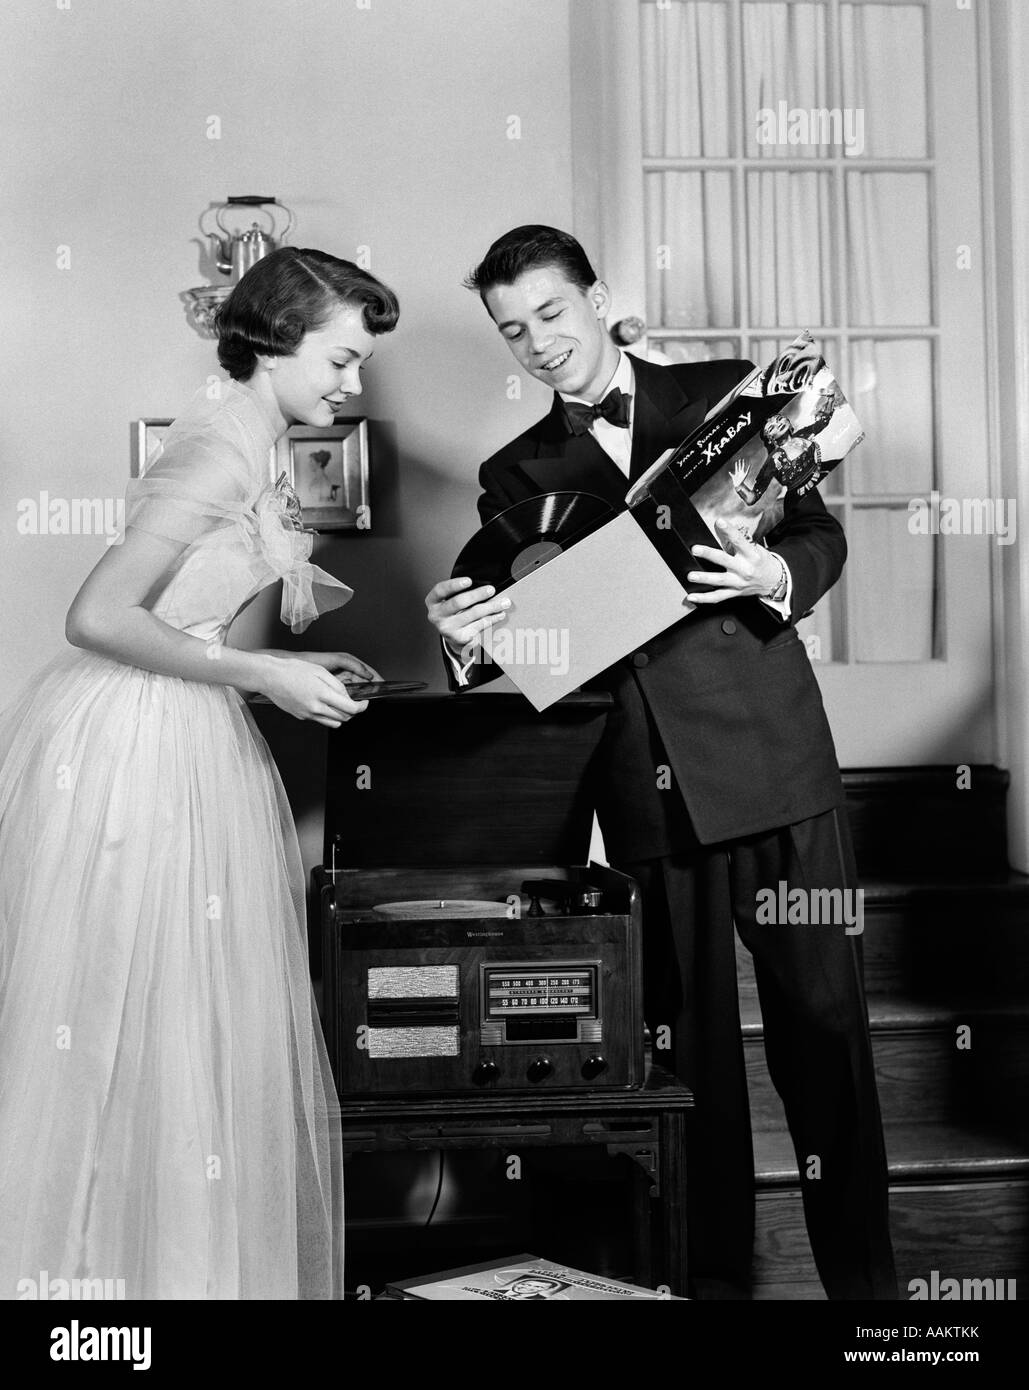 1950s TEEN COUPLE BOY AND GIRL IN PROM FORMAL WEAR PLAYING PHONOGRAPH RECORDS IN HOME LIVING ROOM Stock Photo